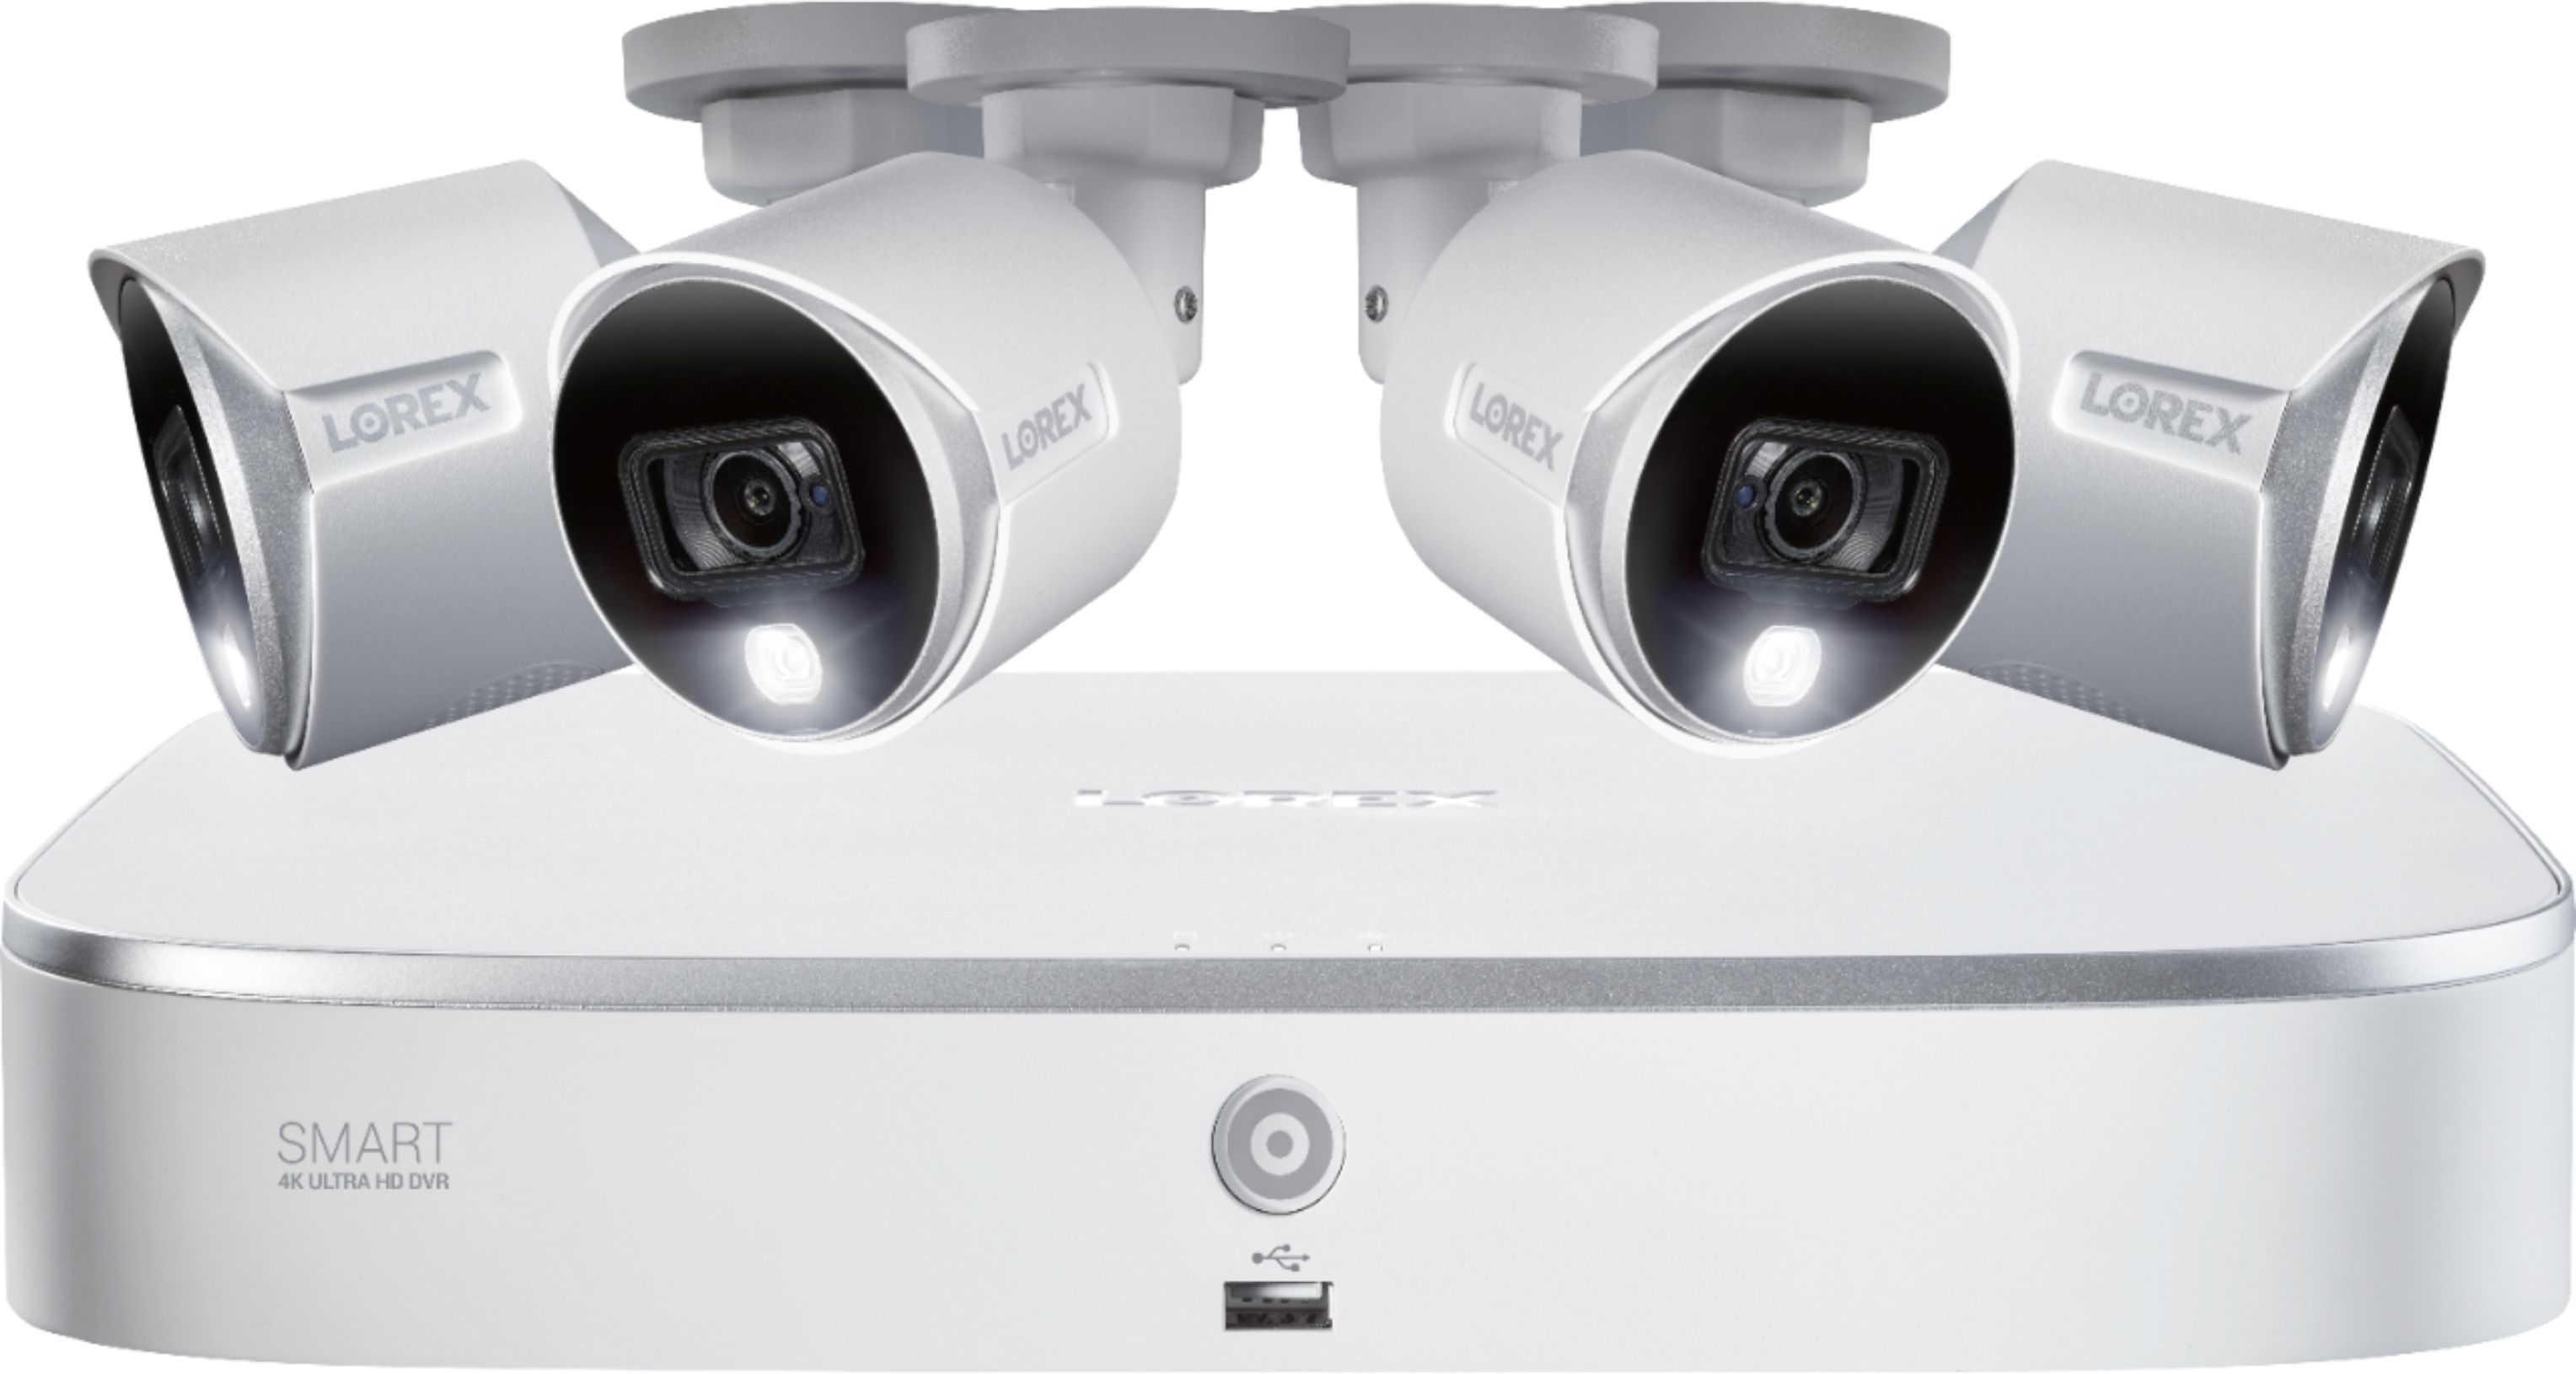 wireless outdoor security cameras with dvr